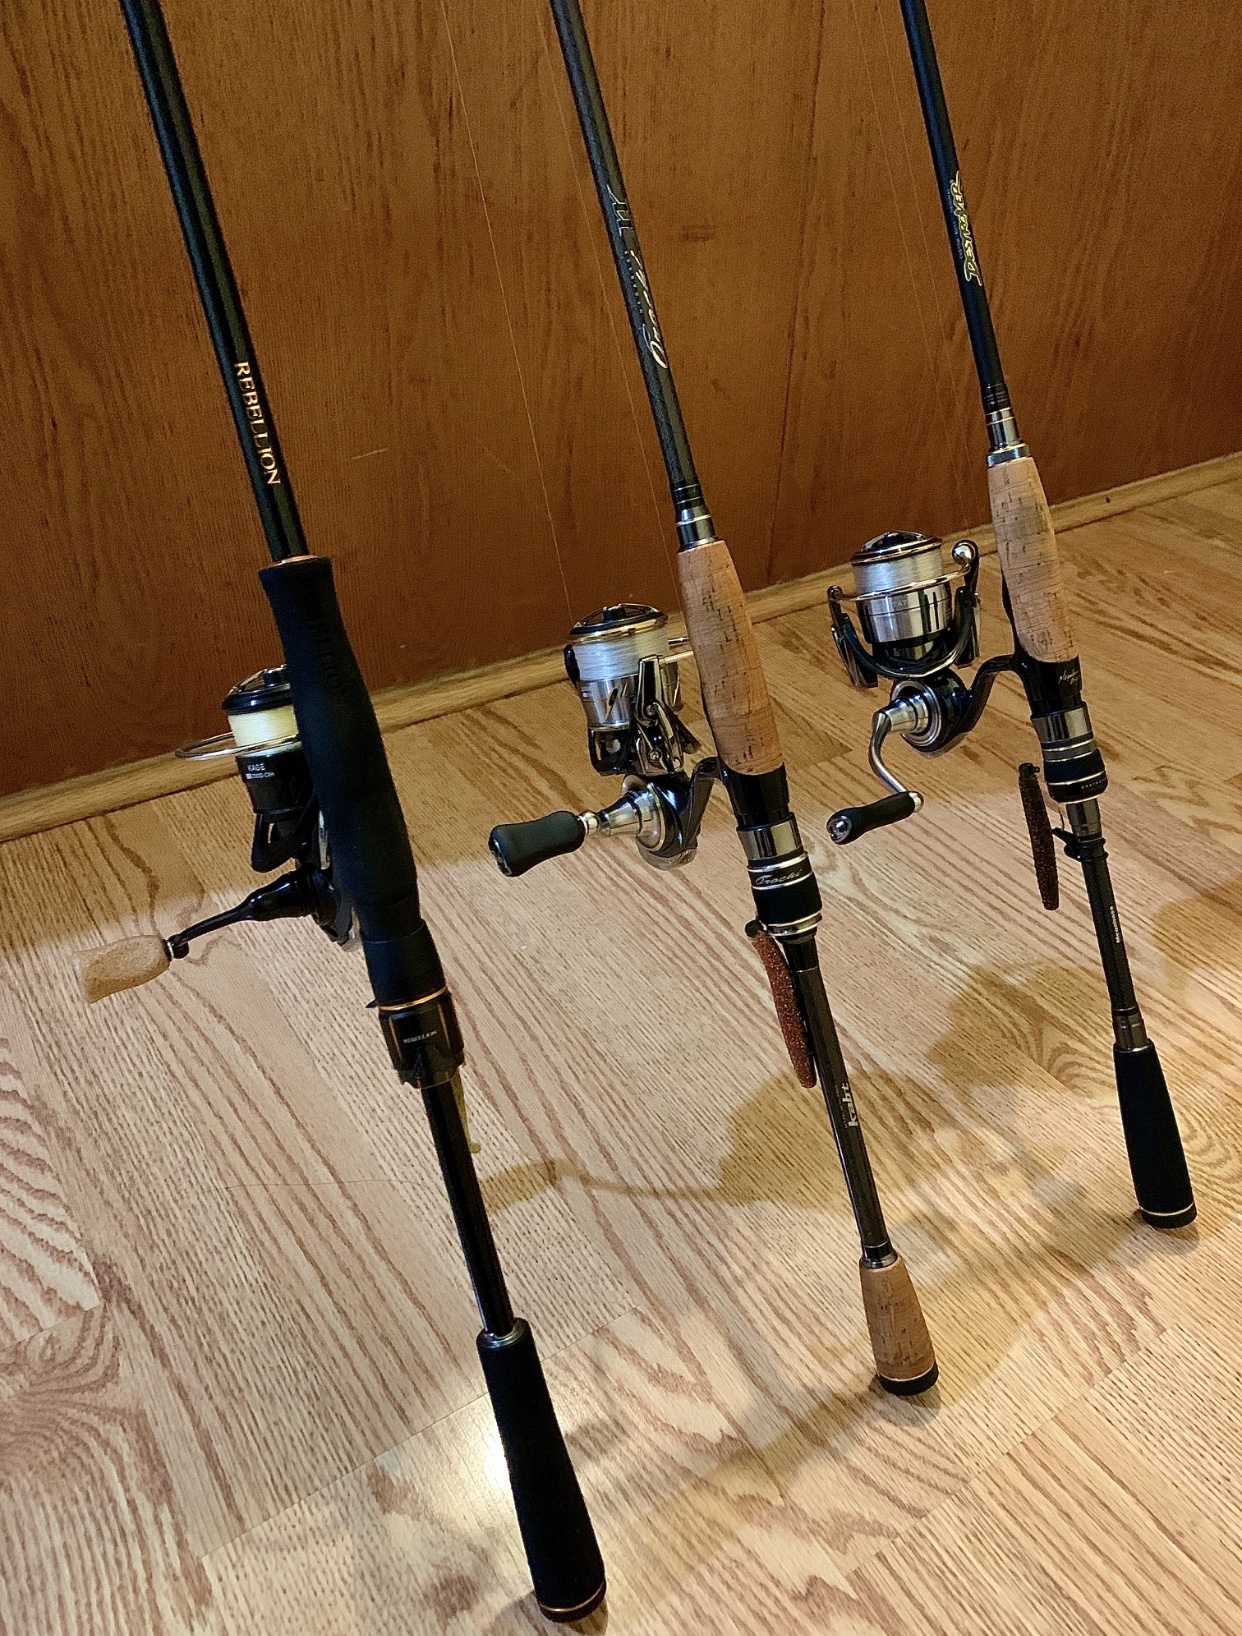 What's your favorite finesse rod and reel? - Fishing Rods, Reels